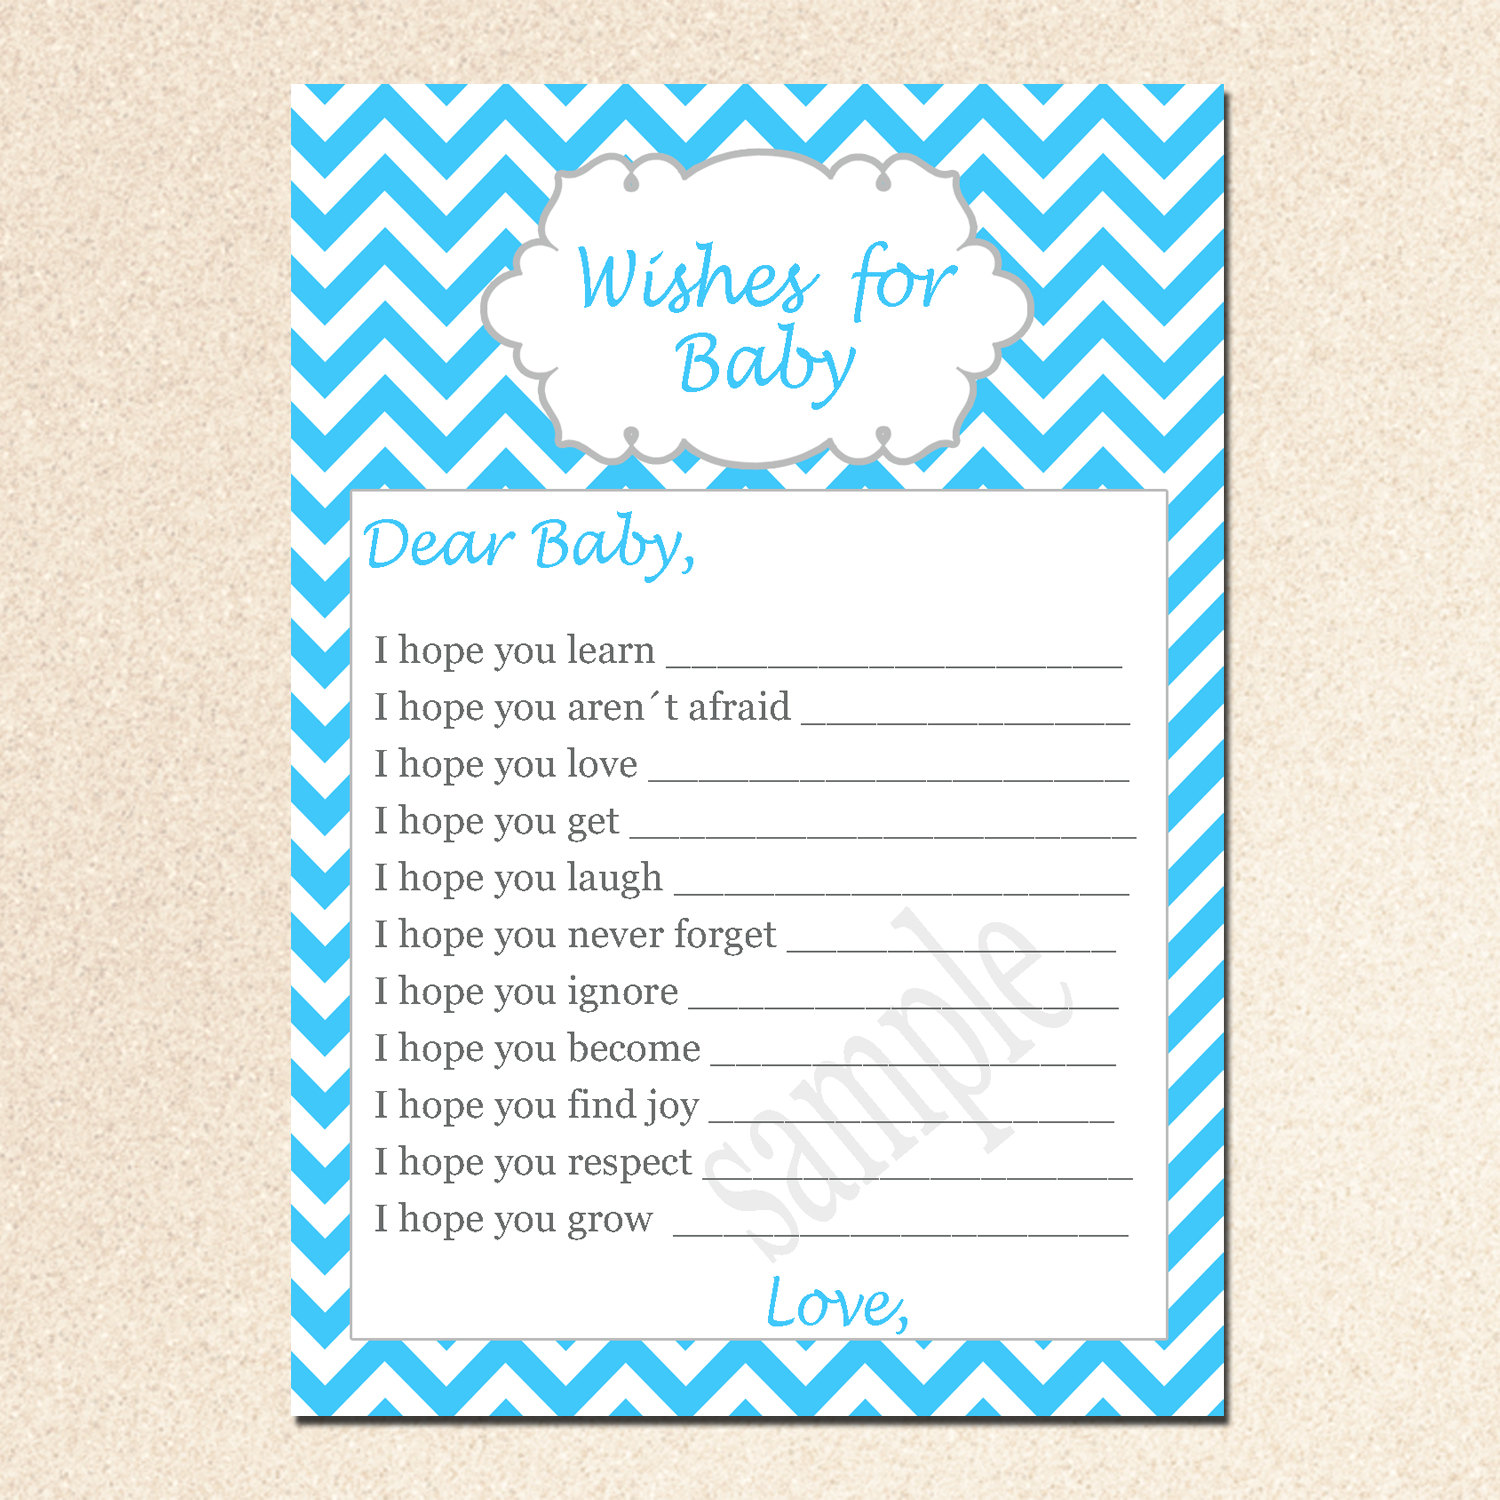 5-best-images-of-free-printable-baby-wishes-cards-free-printable-baby-shower-wishes-free